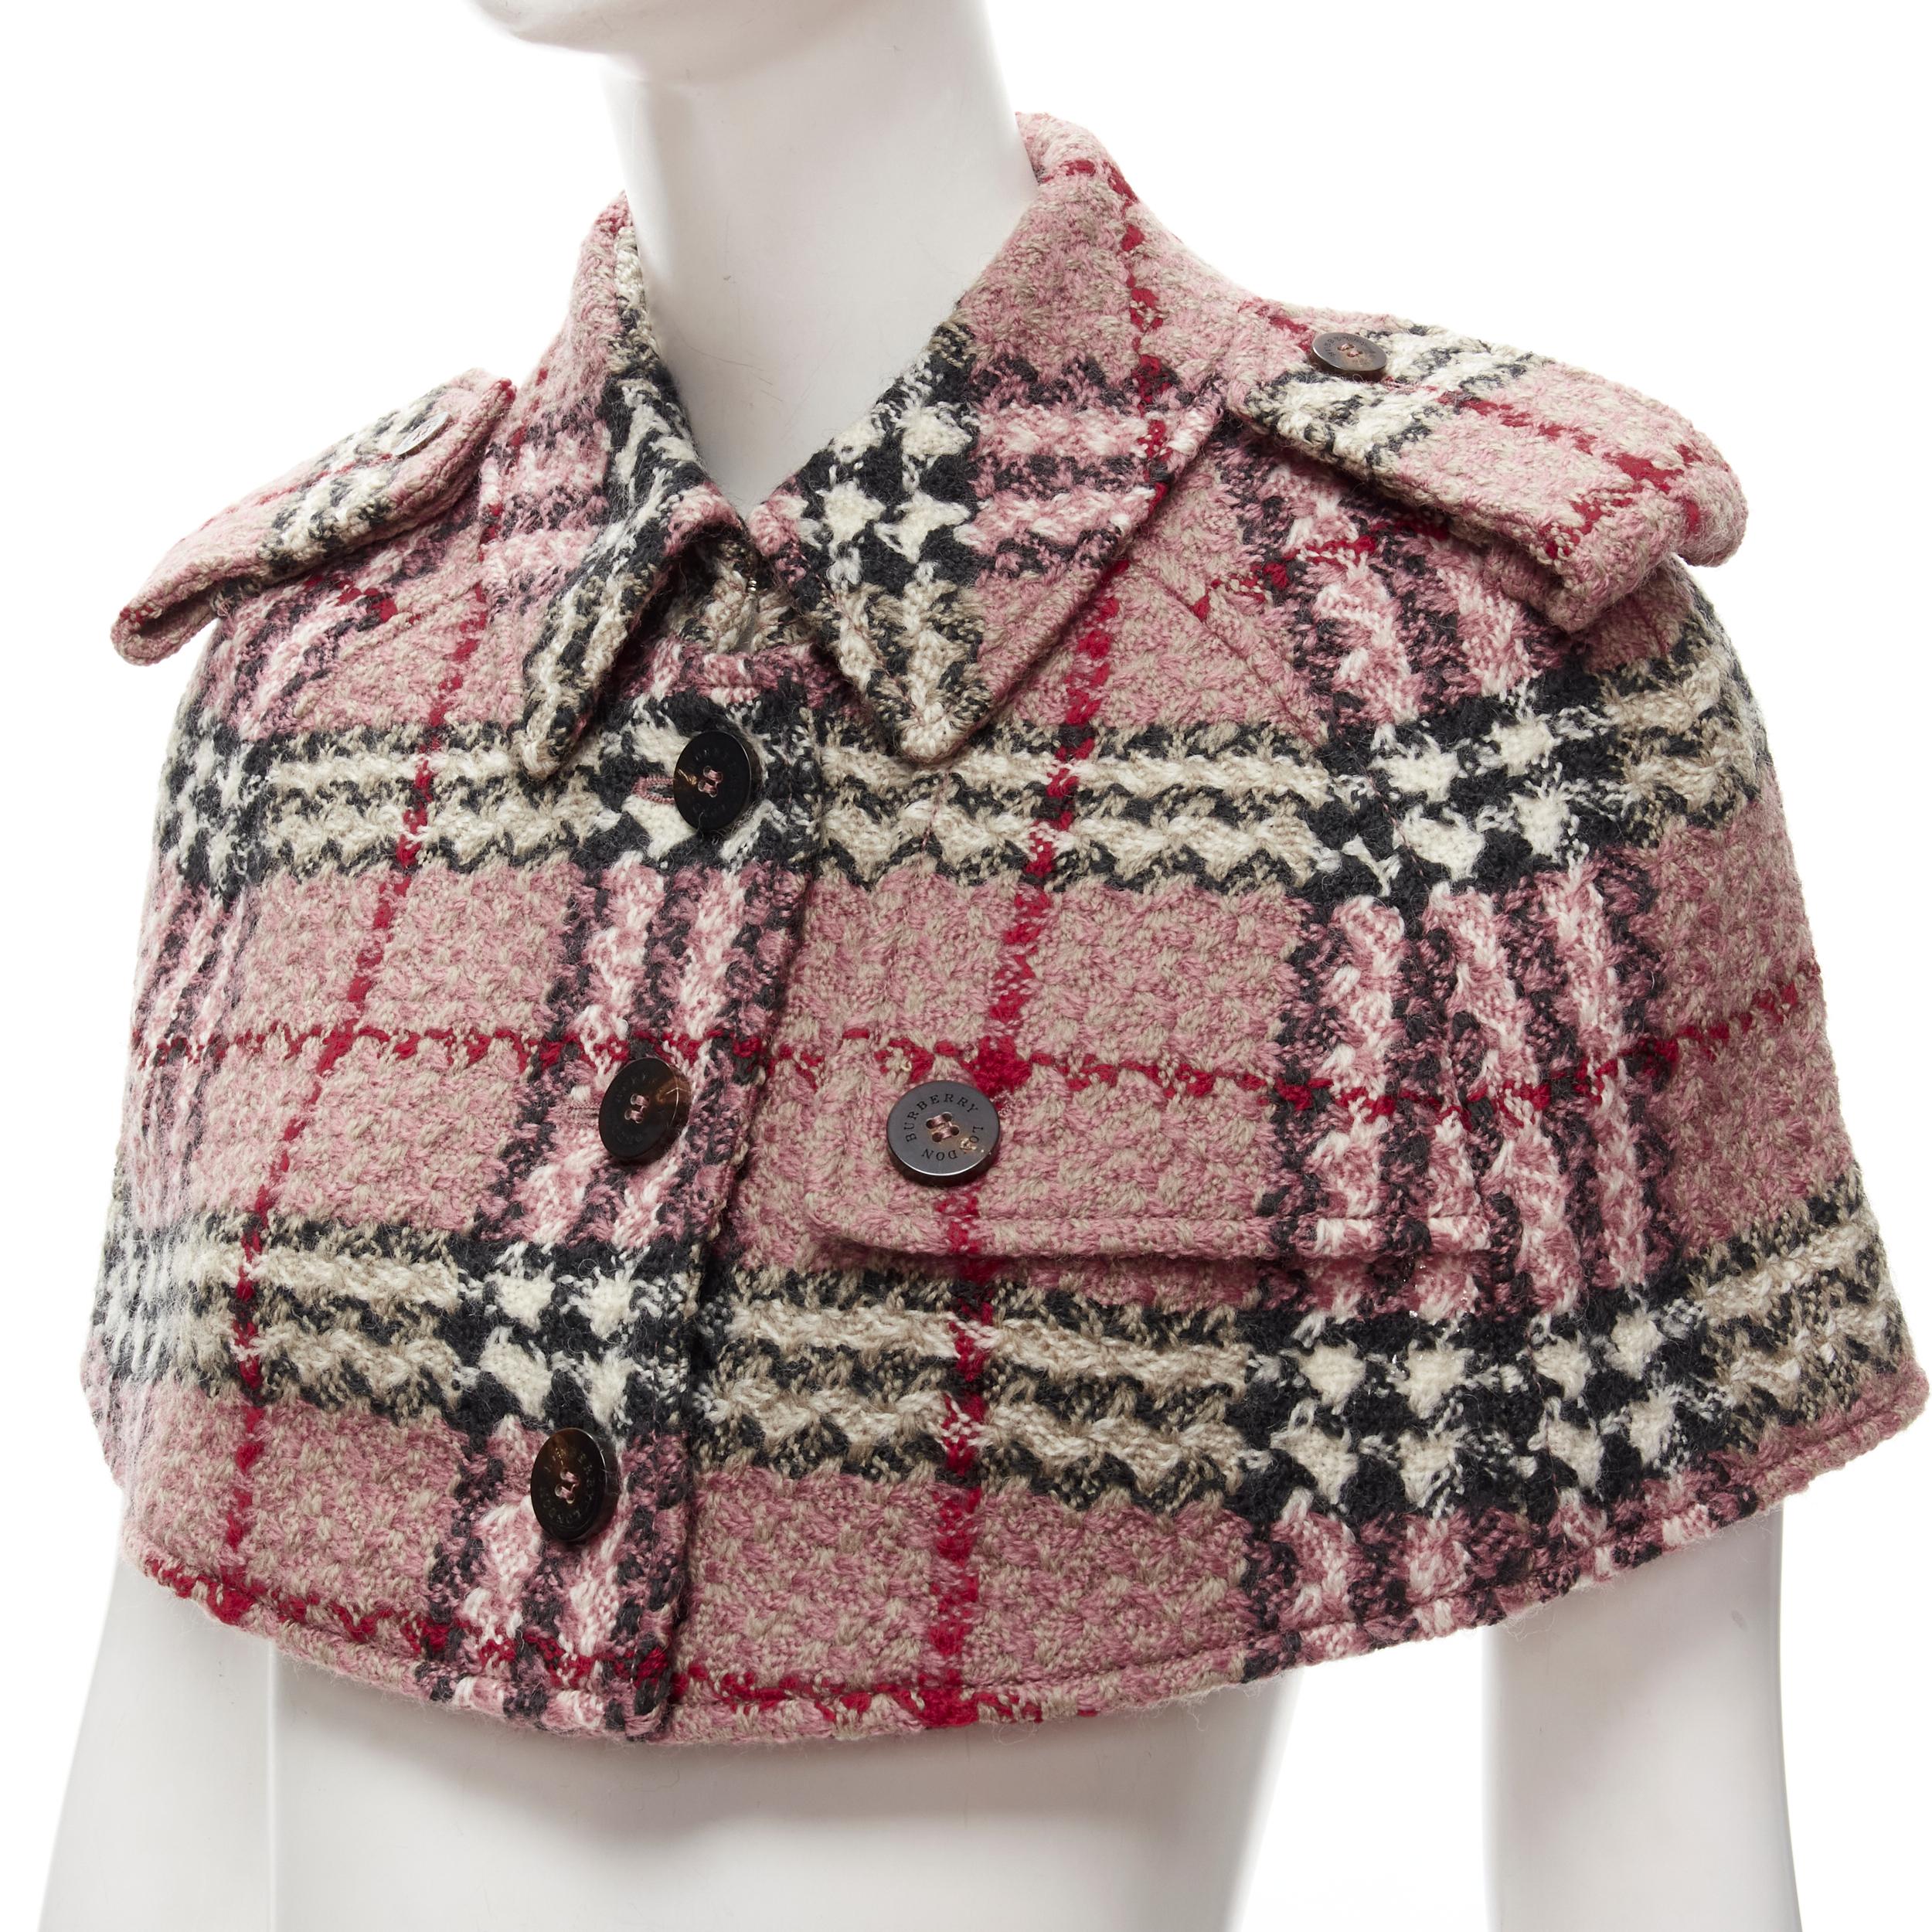 BURBERRY LONDON House Check pink wool boucle cropped capelet trench UK6 US4 S
Brand: Burberry
Collection: House Check 
Extra Detail: Capelet with trench coat detail. Double breasted front.

CONDITION:
Condition: Excellent, this item was pre-owned